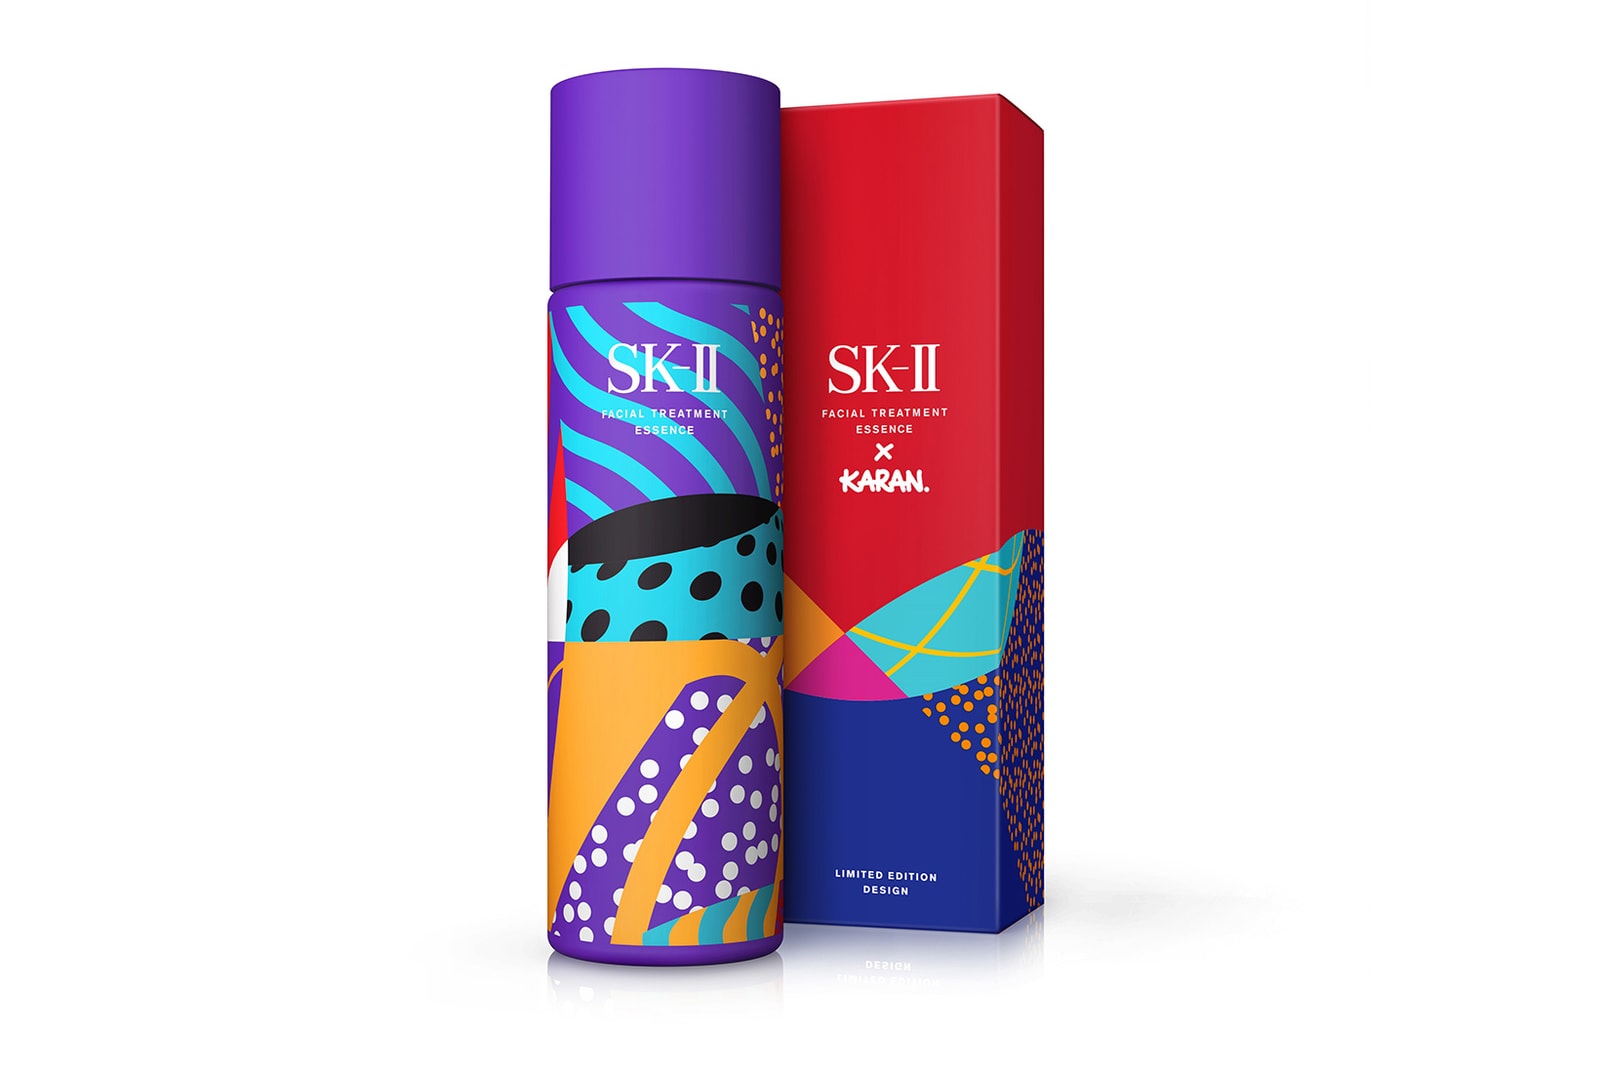 SK-II Facial Treatment Essence Review skincare beauty miracle water